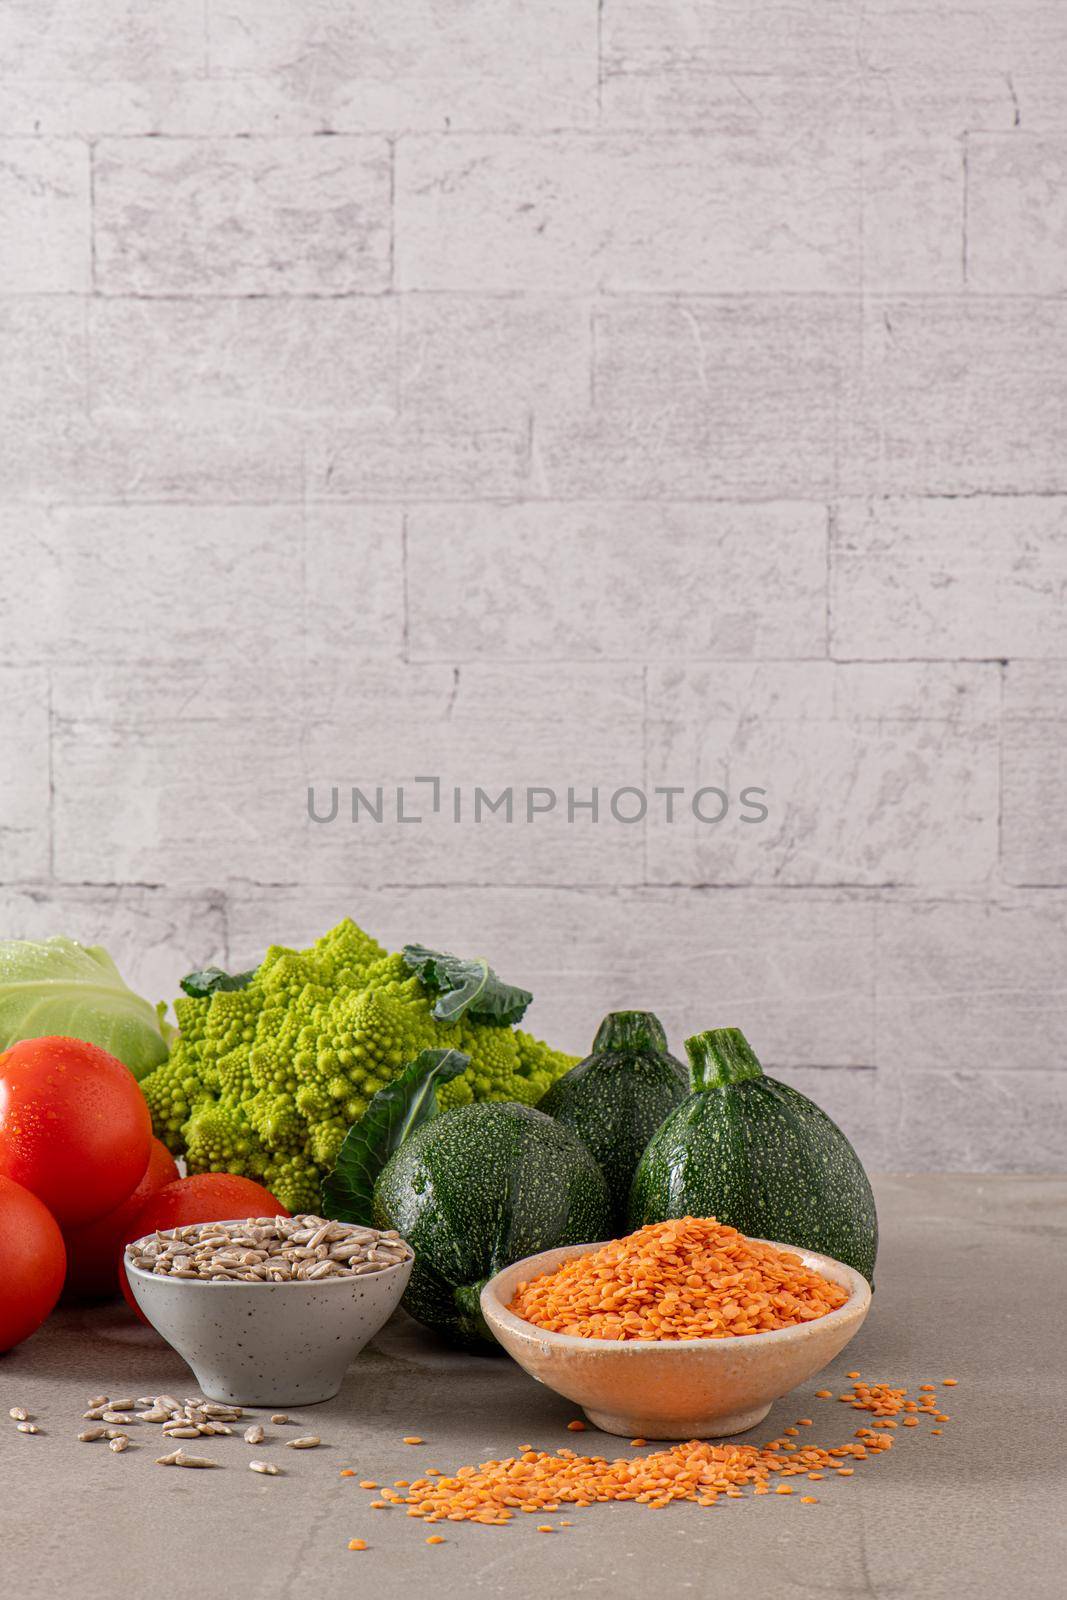 Healthy food selection by homydesign